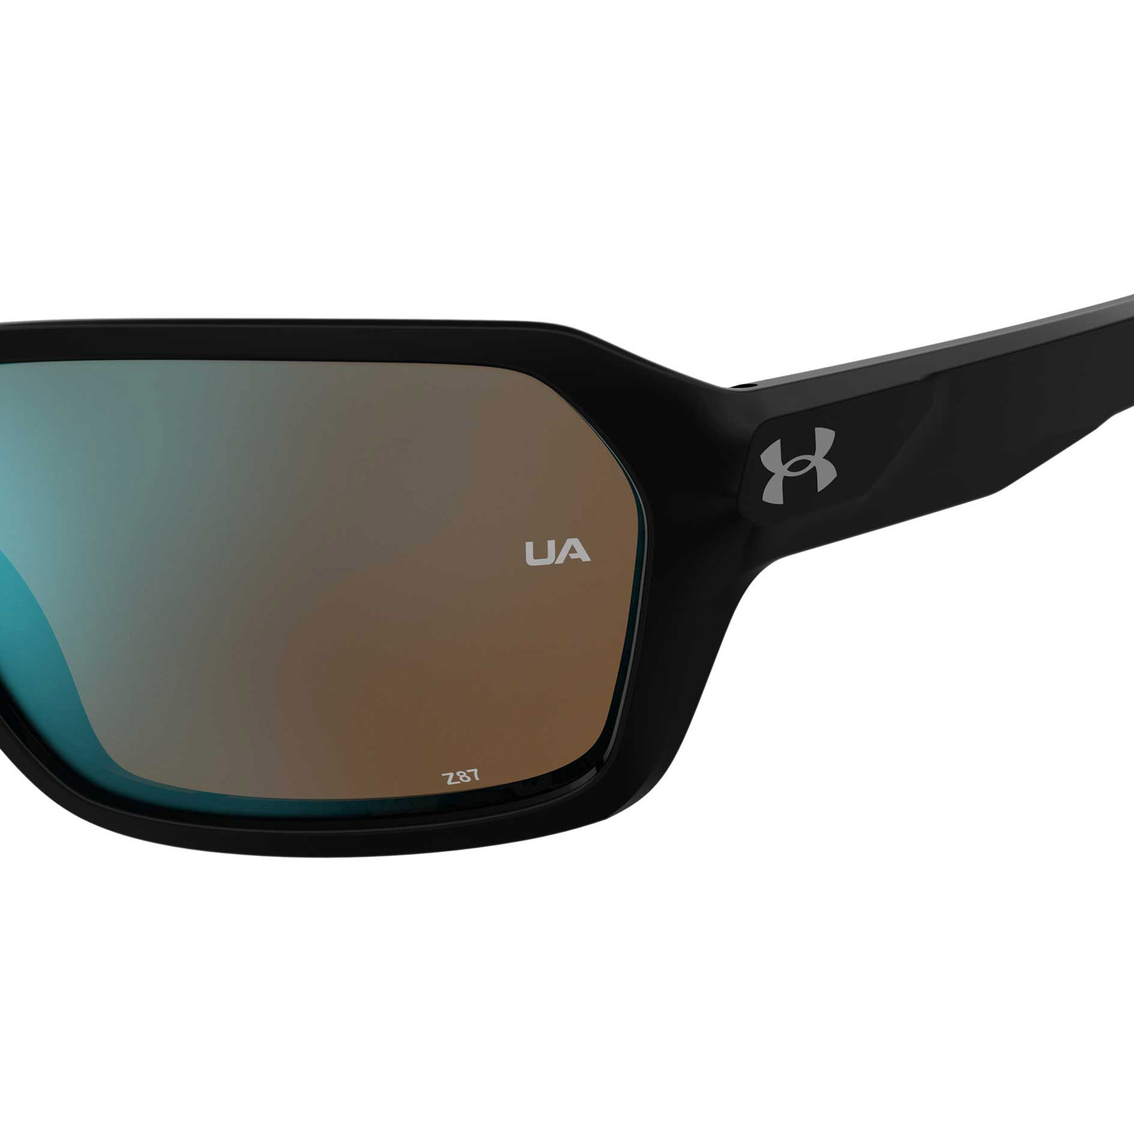 Under Armour Recon Sunglasses 0003KA - Image 3 of 3